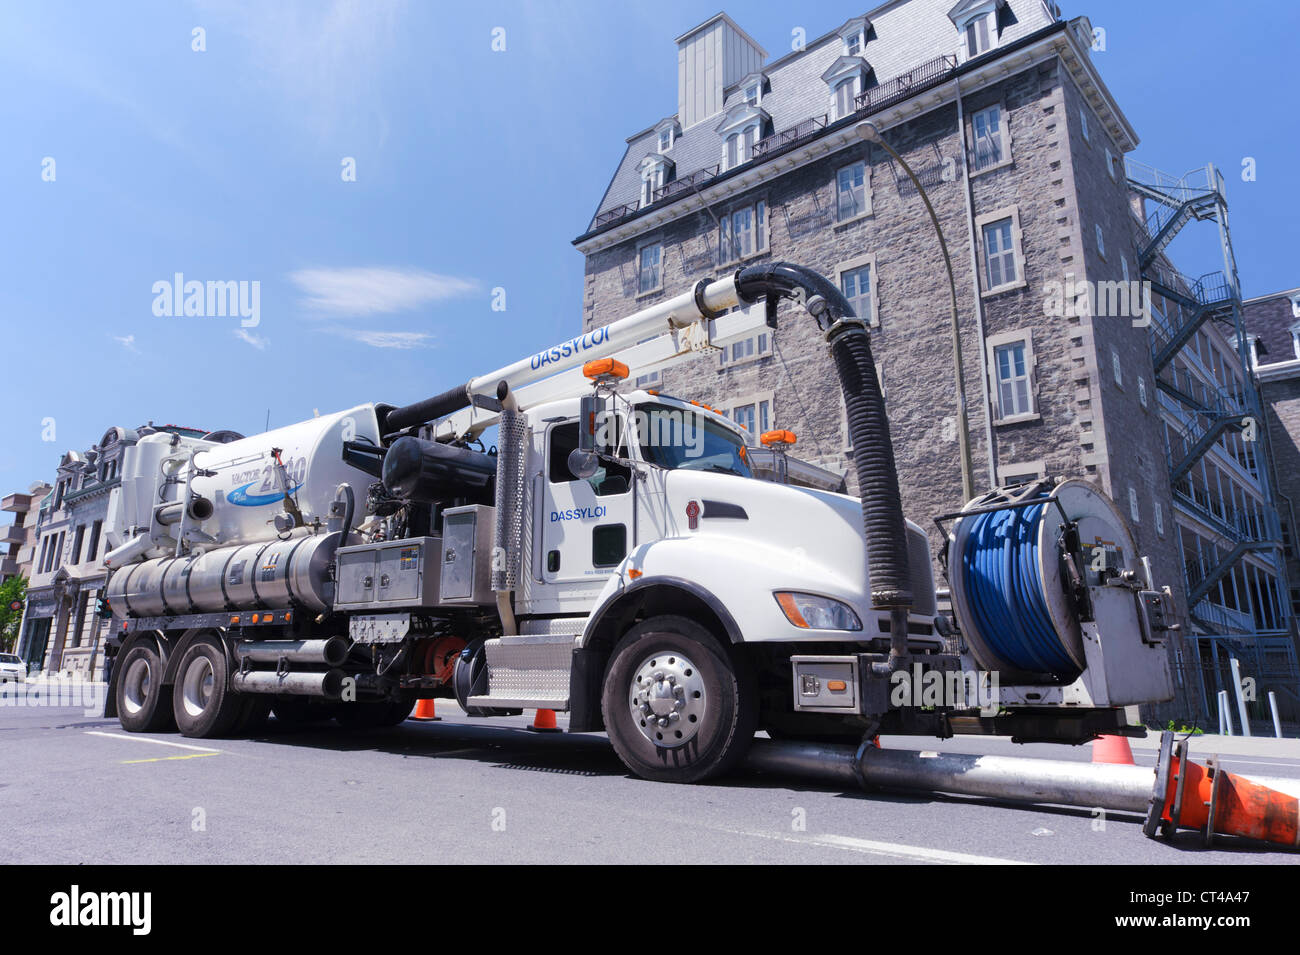 Vactor 2100 sewer vacuum cleaner truck on Ste Catherine street, Montreal, province of Quebec, Canada. Stock Photo